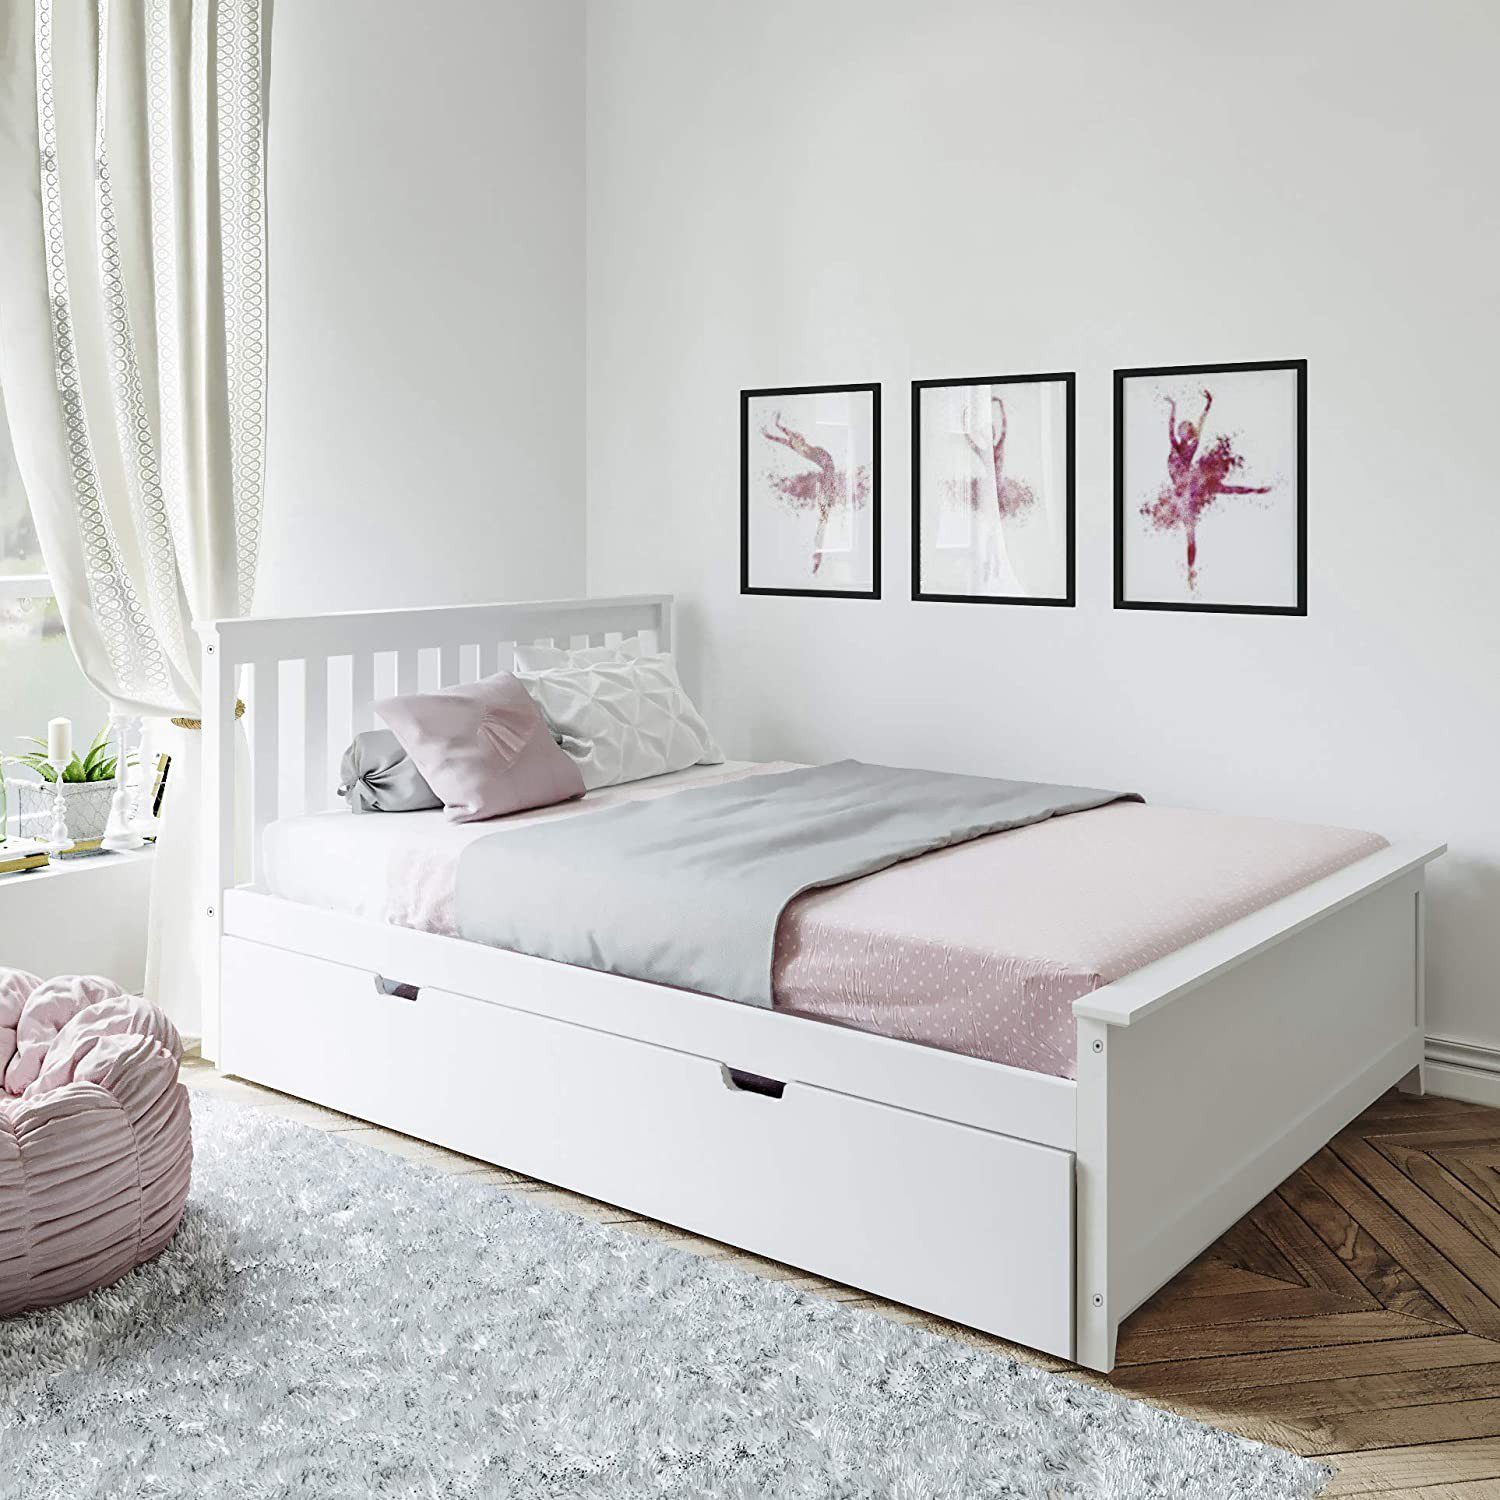 SOLID WOOD FULL SIZE PLATFORM BED IN WHITE FINISH WITH TRUNDLE BED